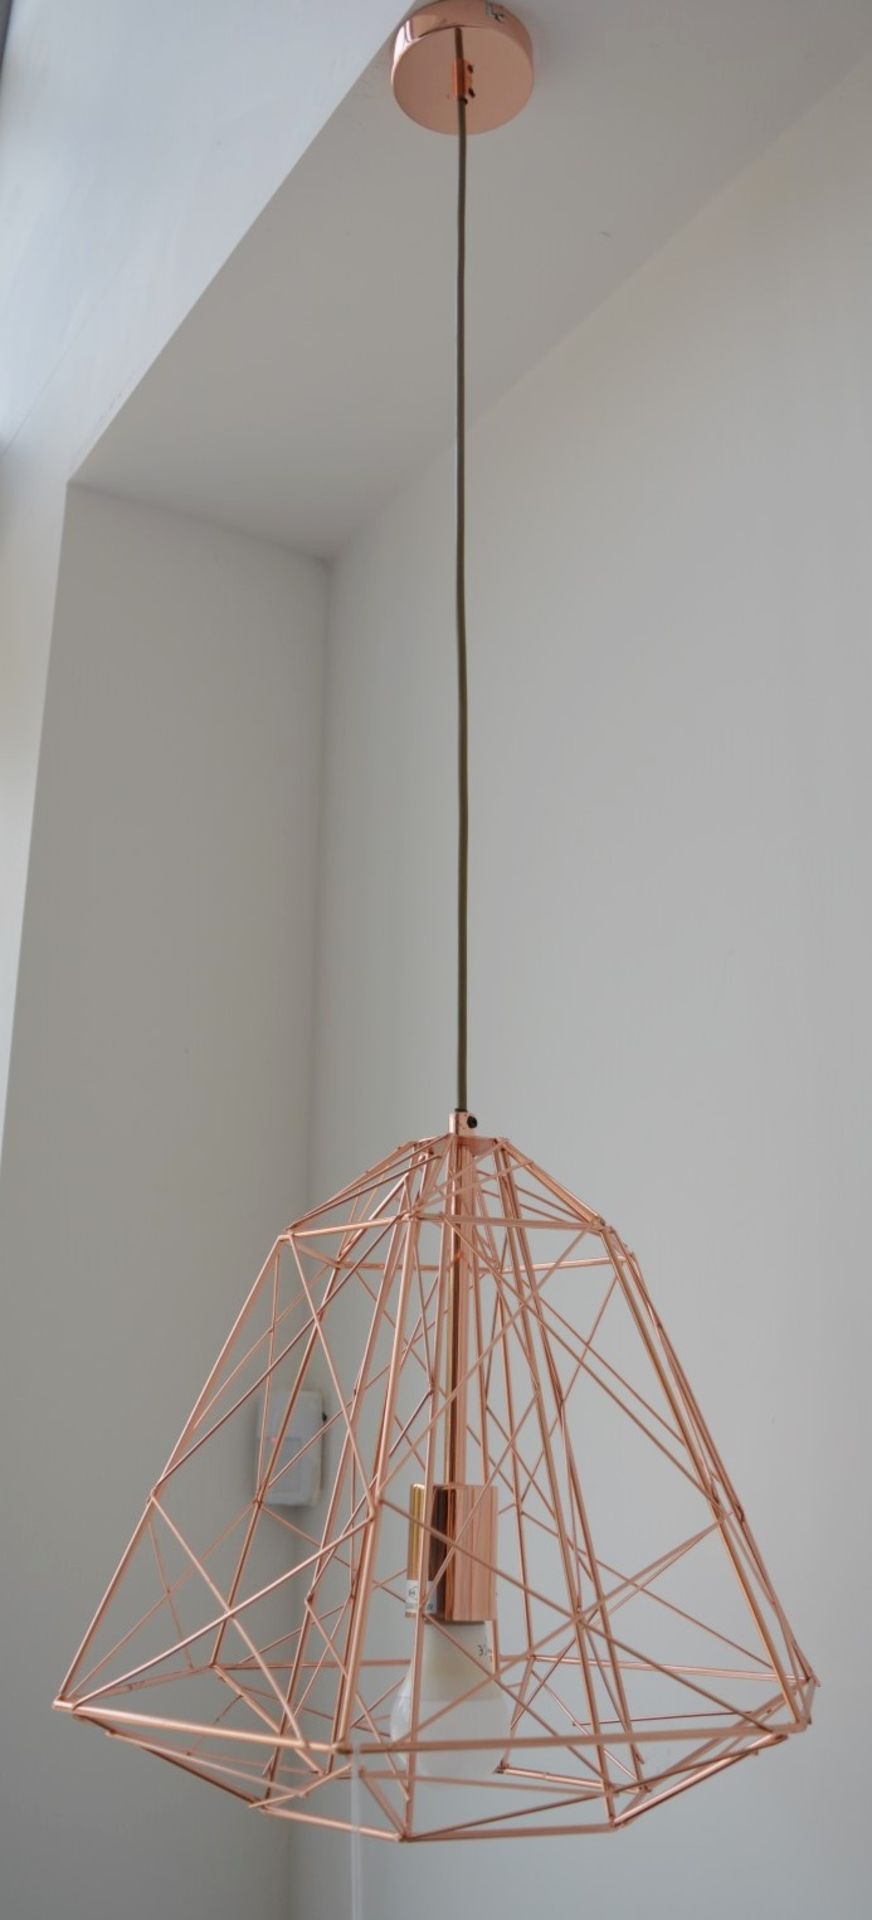 1 x GEOMETRIC Cage Frame Pendant Light Fitting With A Shiny Copper Finish - Ex Display Stock - Image 2 of 3